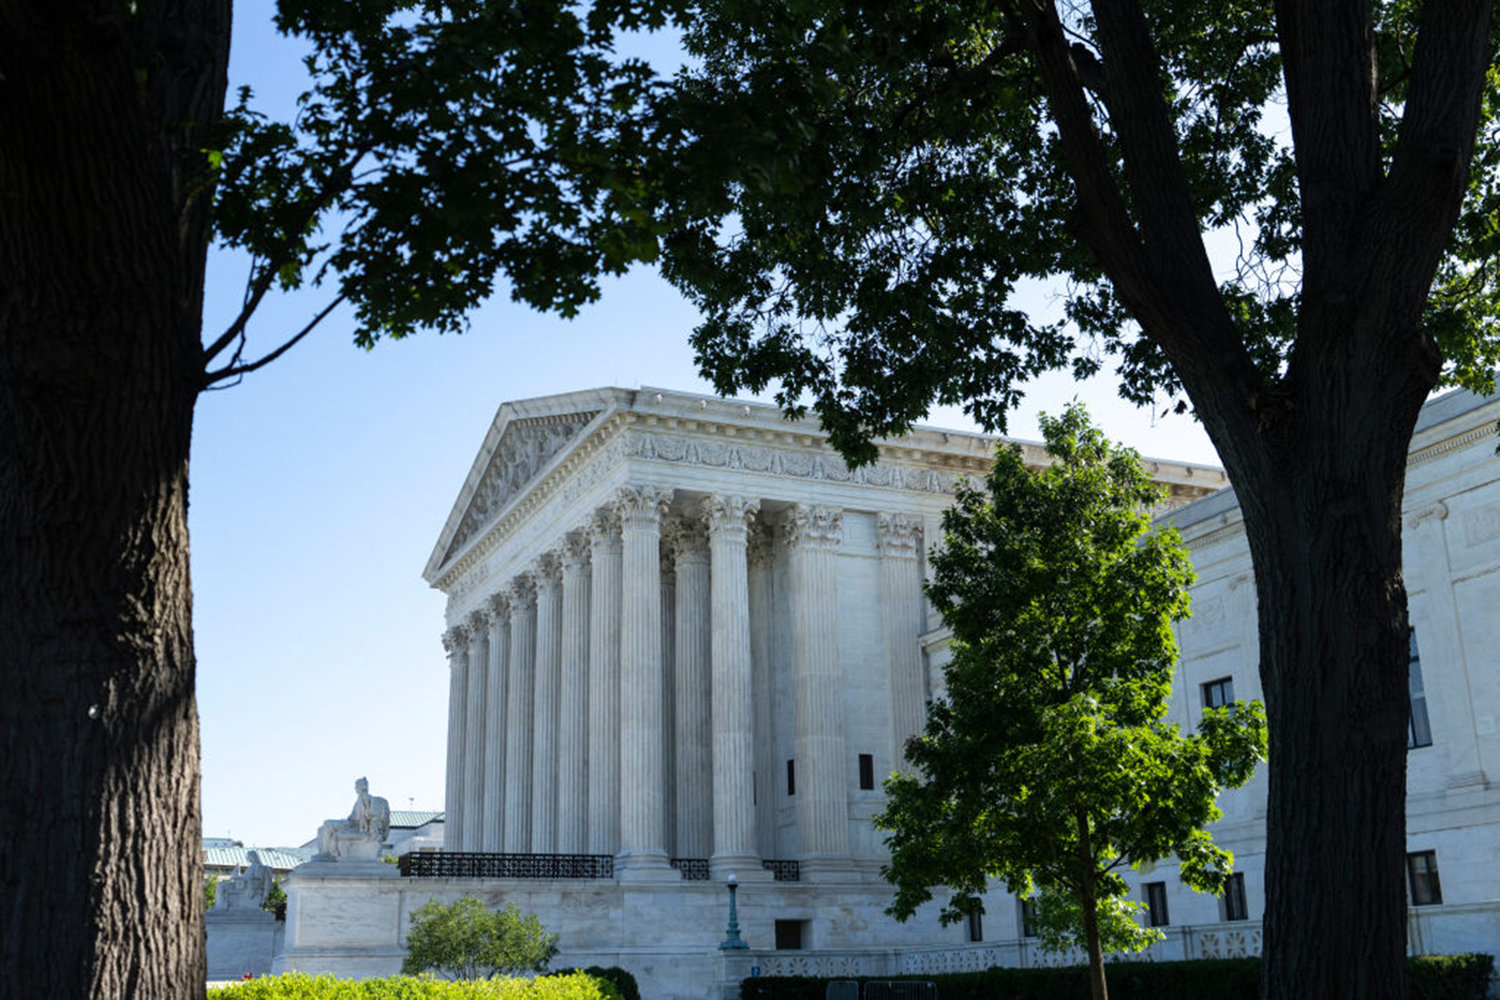 A view of the U.S. Supreme Court on June 28, 2021 in Washington, D.C. (Drew Angerer/Getty Images/TNS)